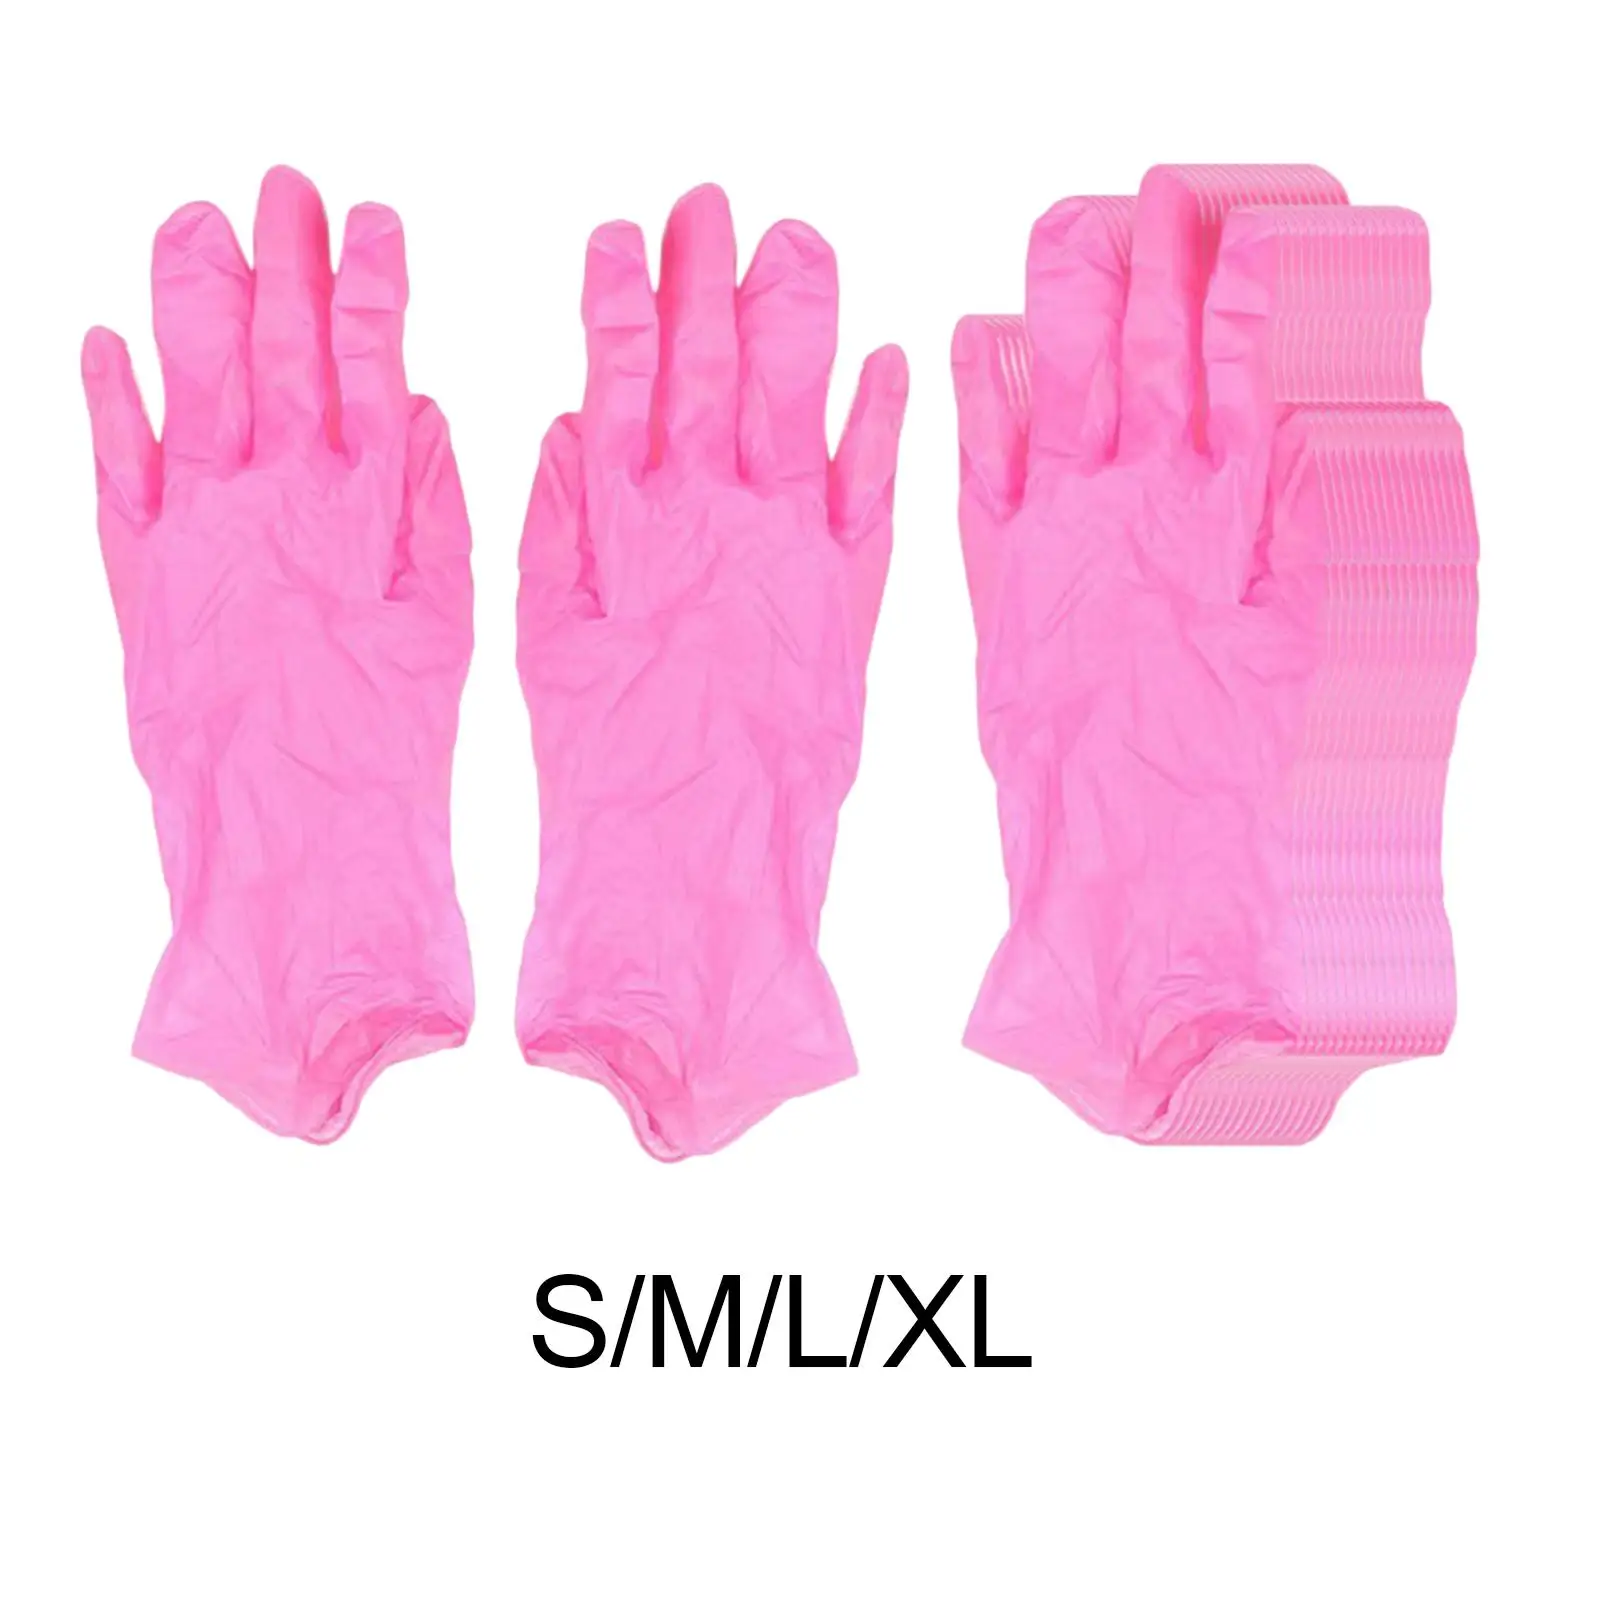 100x Powder Free Disposable Gloves Waterproof Disposable Housework Gloves for Caterers Cooking Crafting Home Gardeners